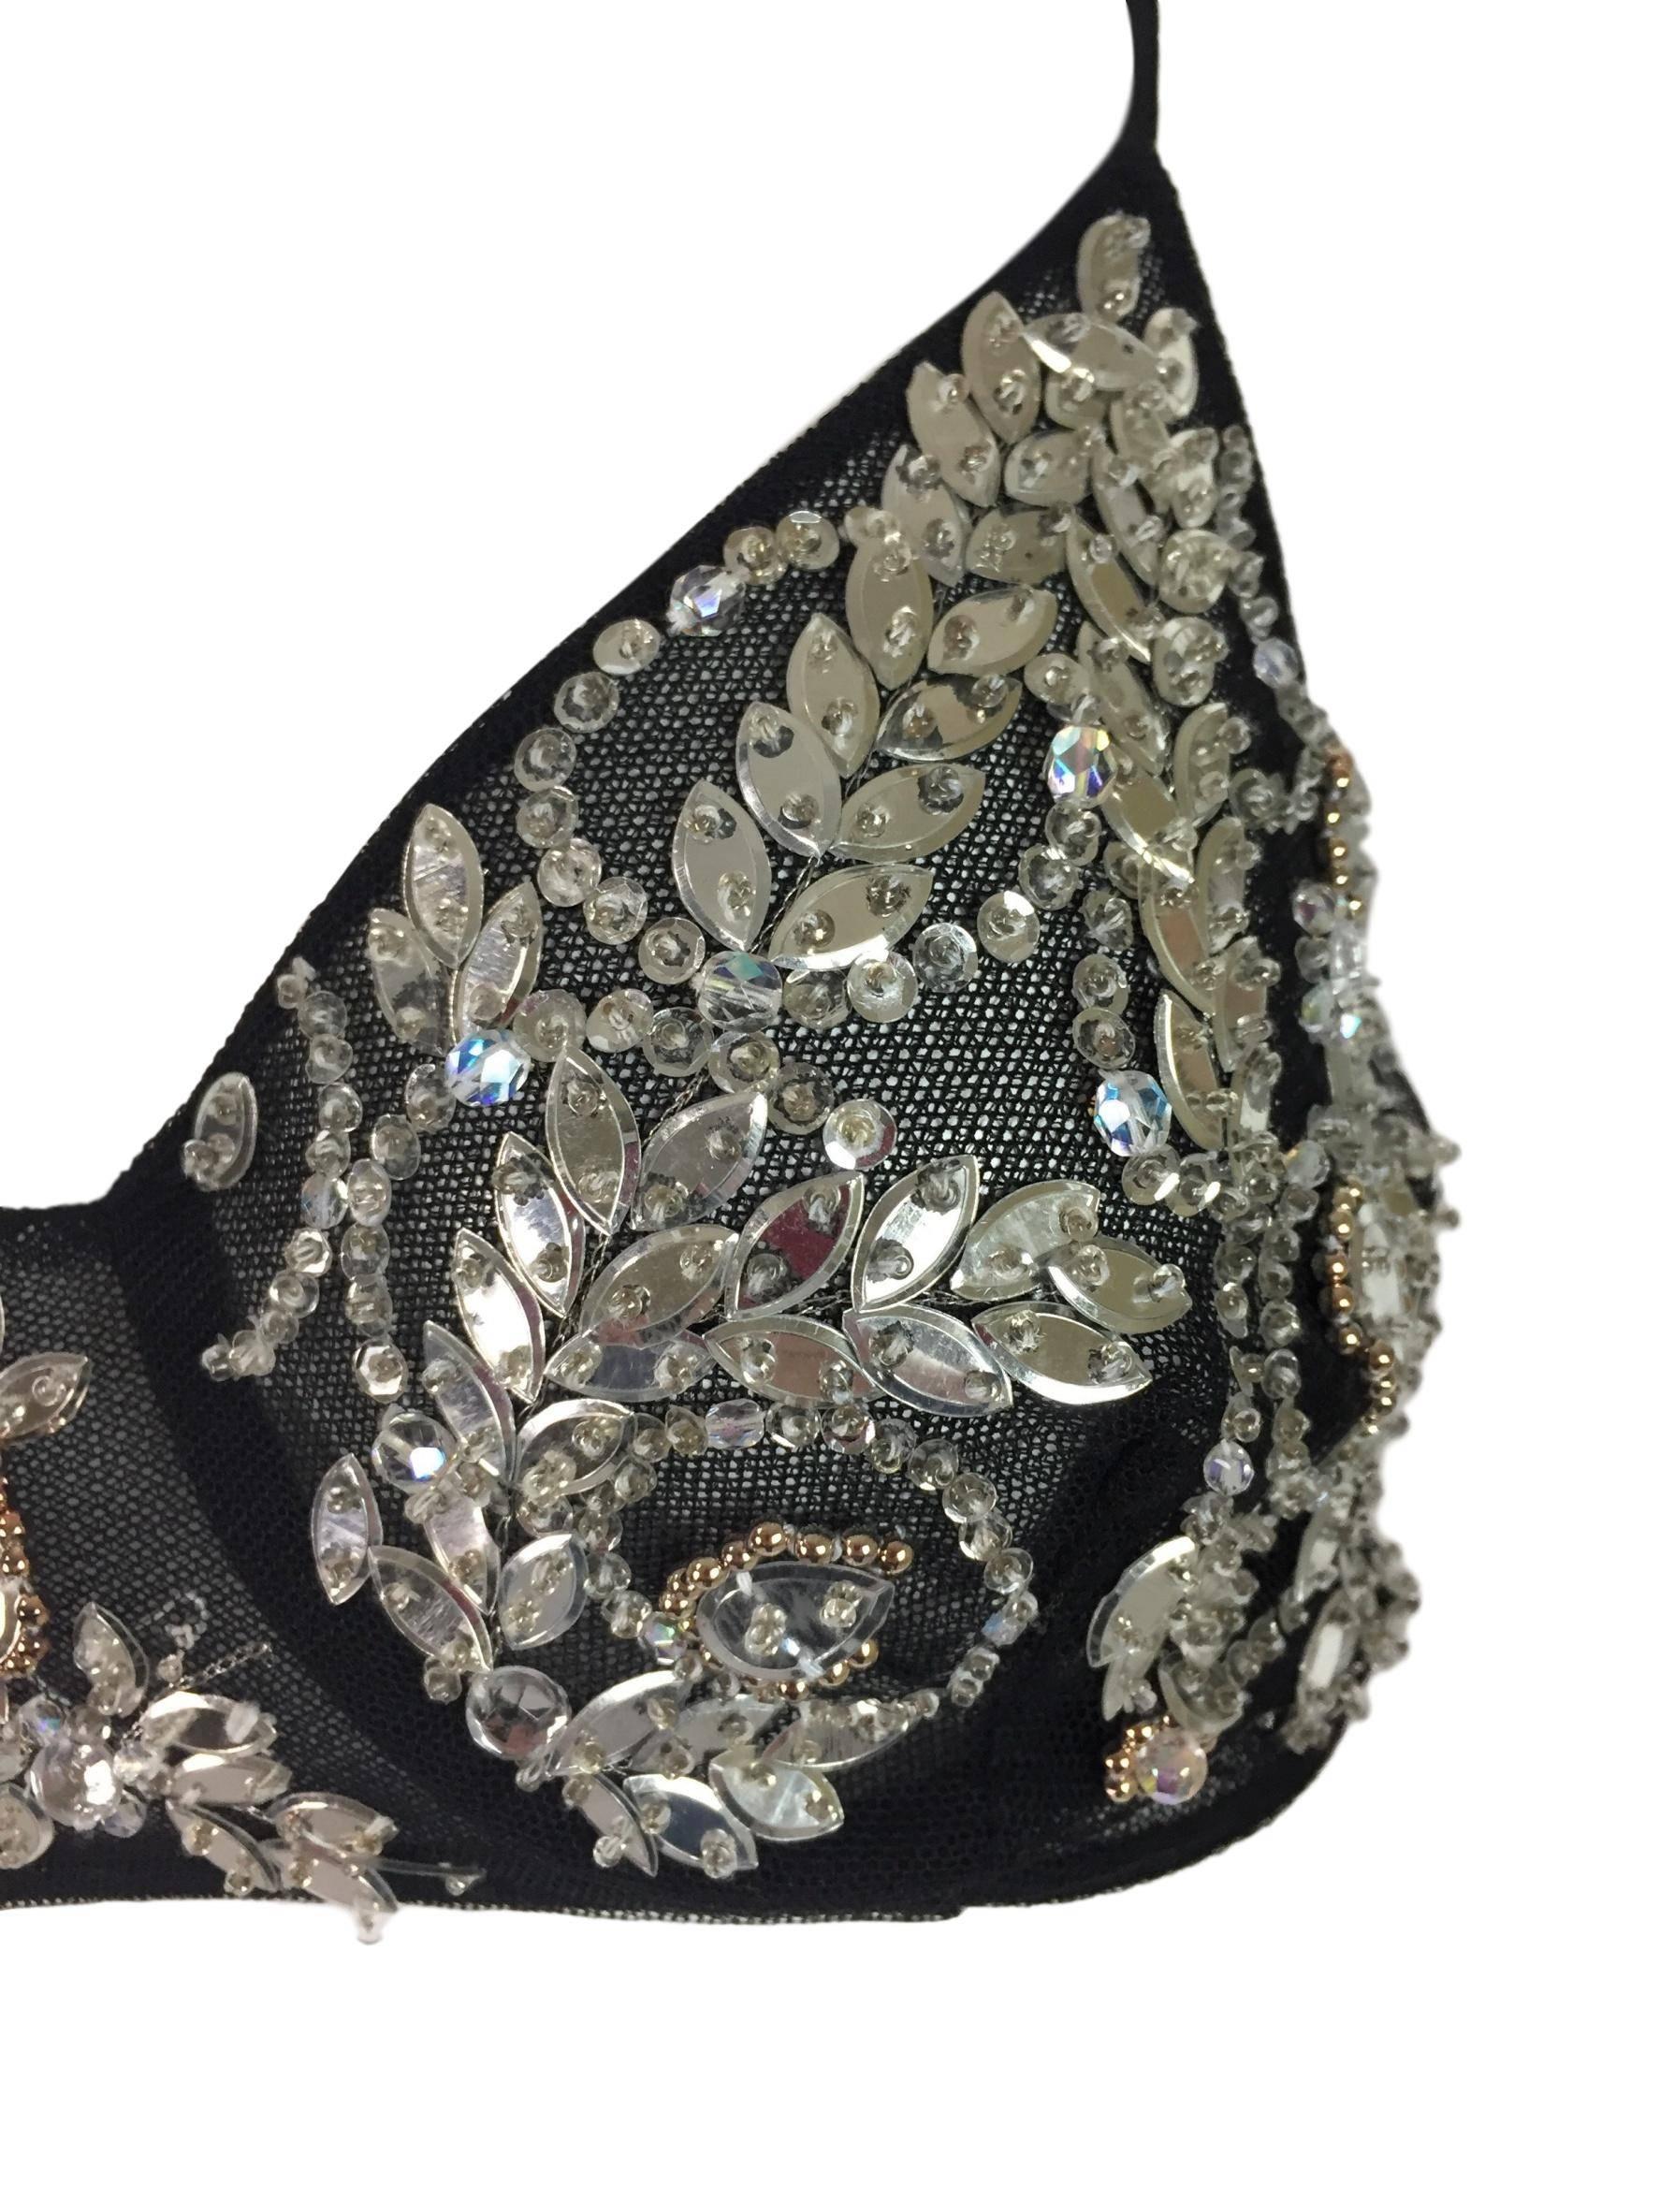 DESIGNER: 1990's La Perla Ritmo- known as La Perla now. 

Please contact for more information and/or photos.

CONDITION: Good- no flaws, this has not been worn but there are a few beads that loosened and were re-sewn, please see last photo.